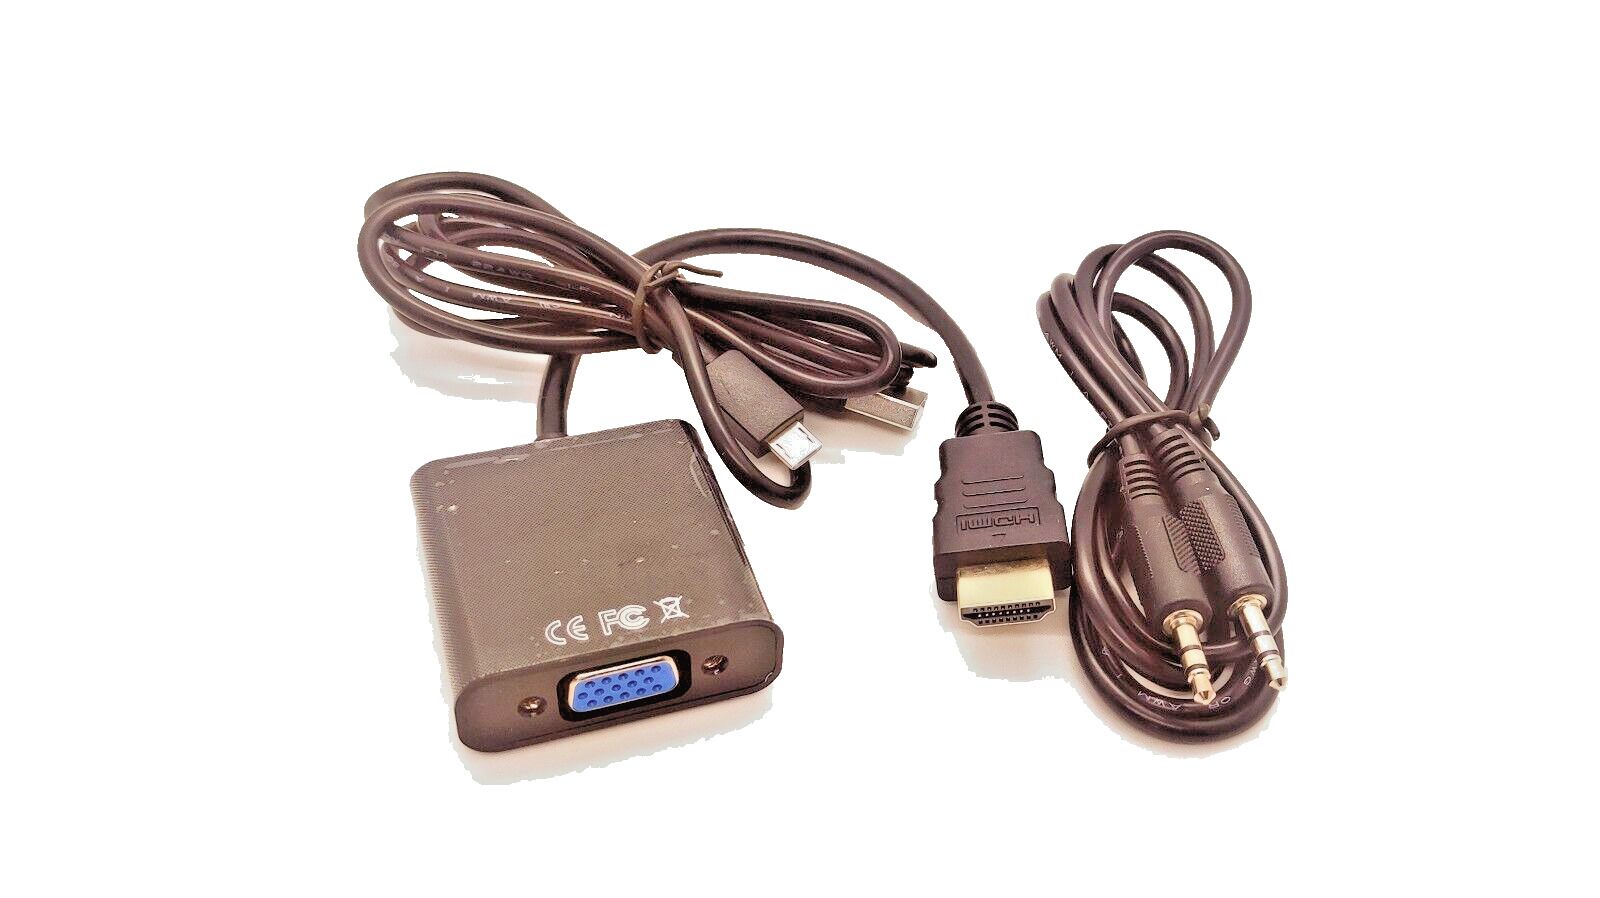 HDMI TO VGA HDMI Male to VGA Female Converter Adapter with Audio + USB Cable